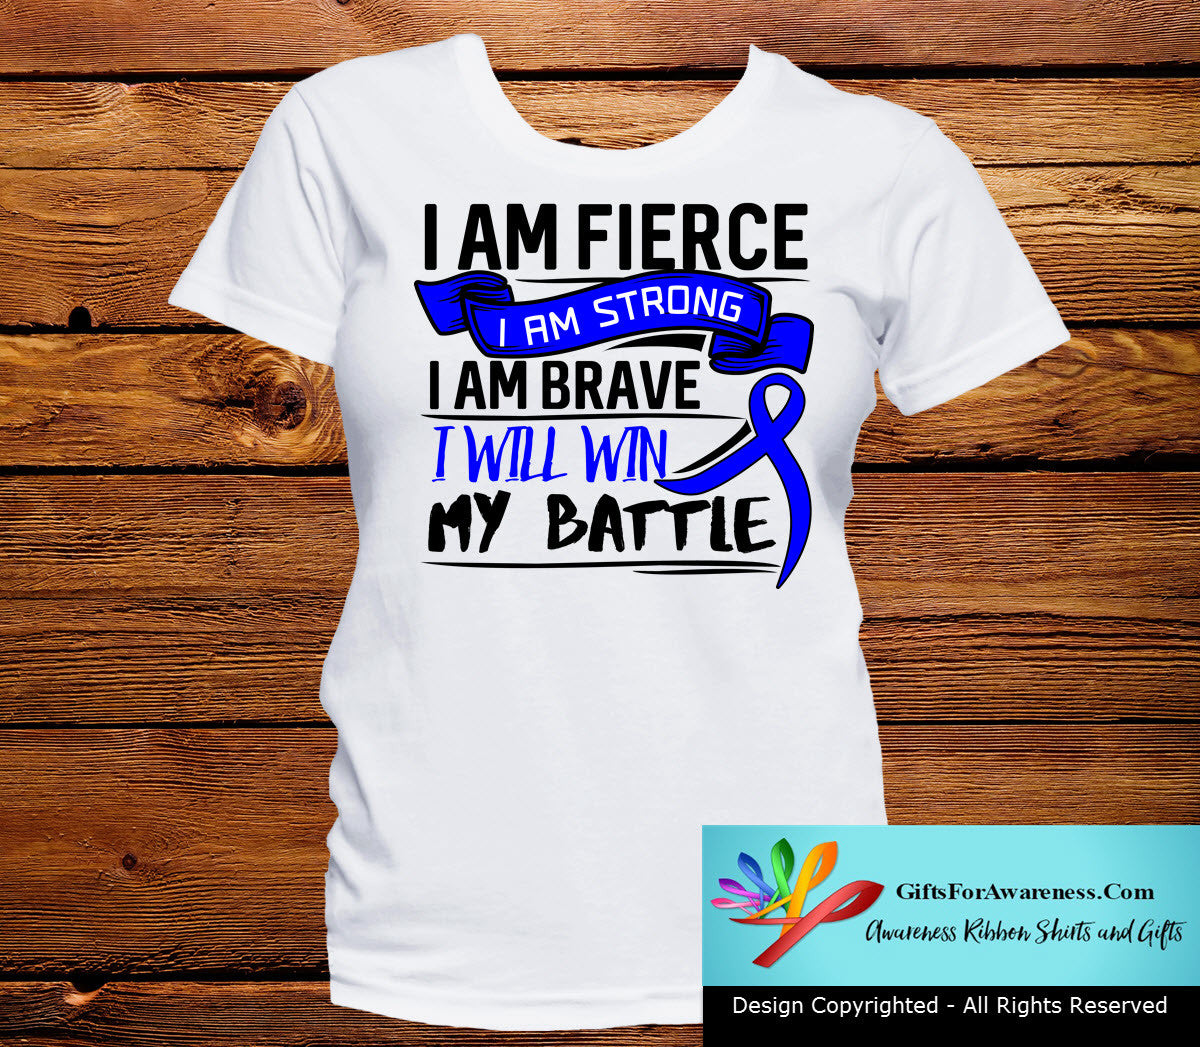 Colon Cancer I Am Fierce Strong and Brave Shirts - GiftsForAwareness